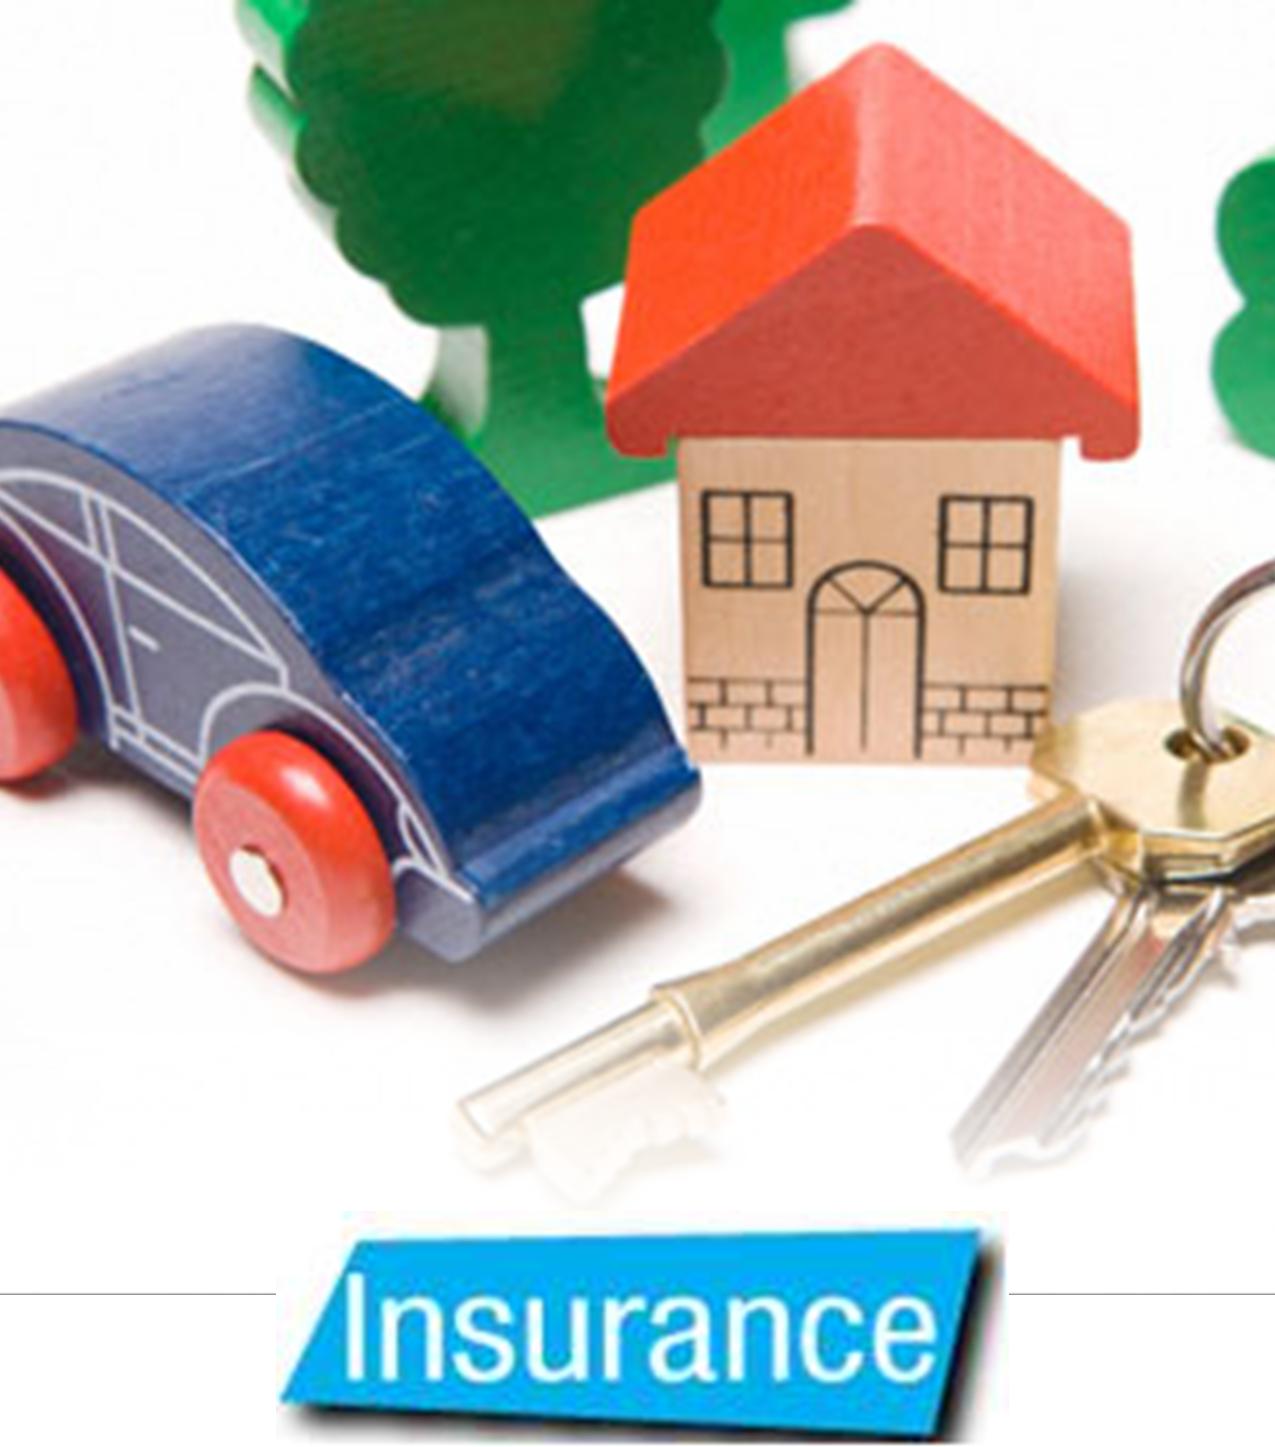  insurance, as it provides comprehensive coverage. The standardized